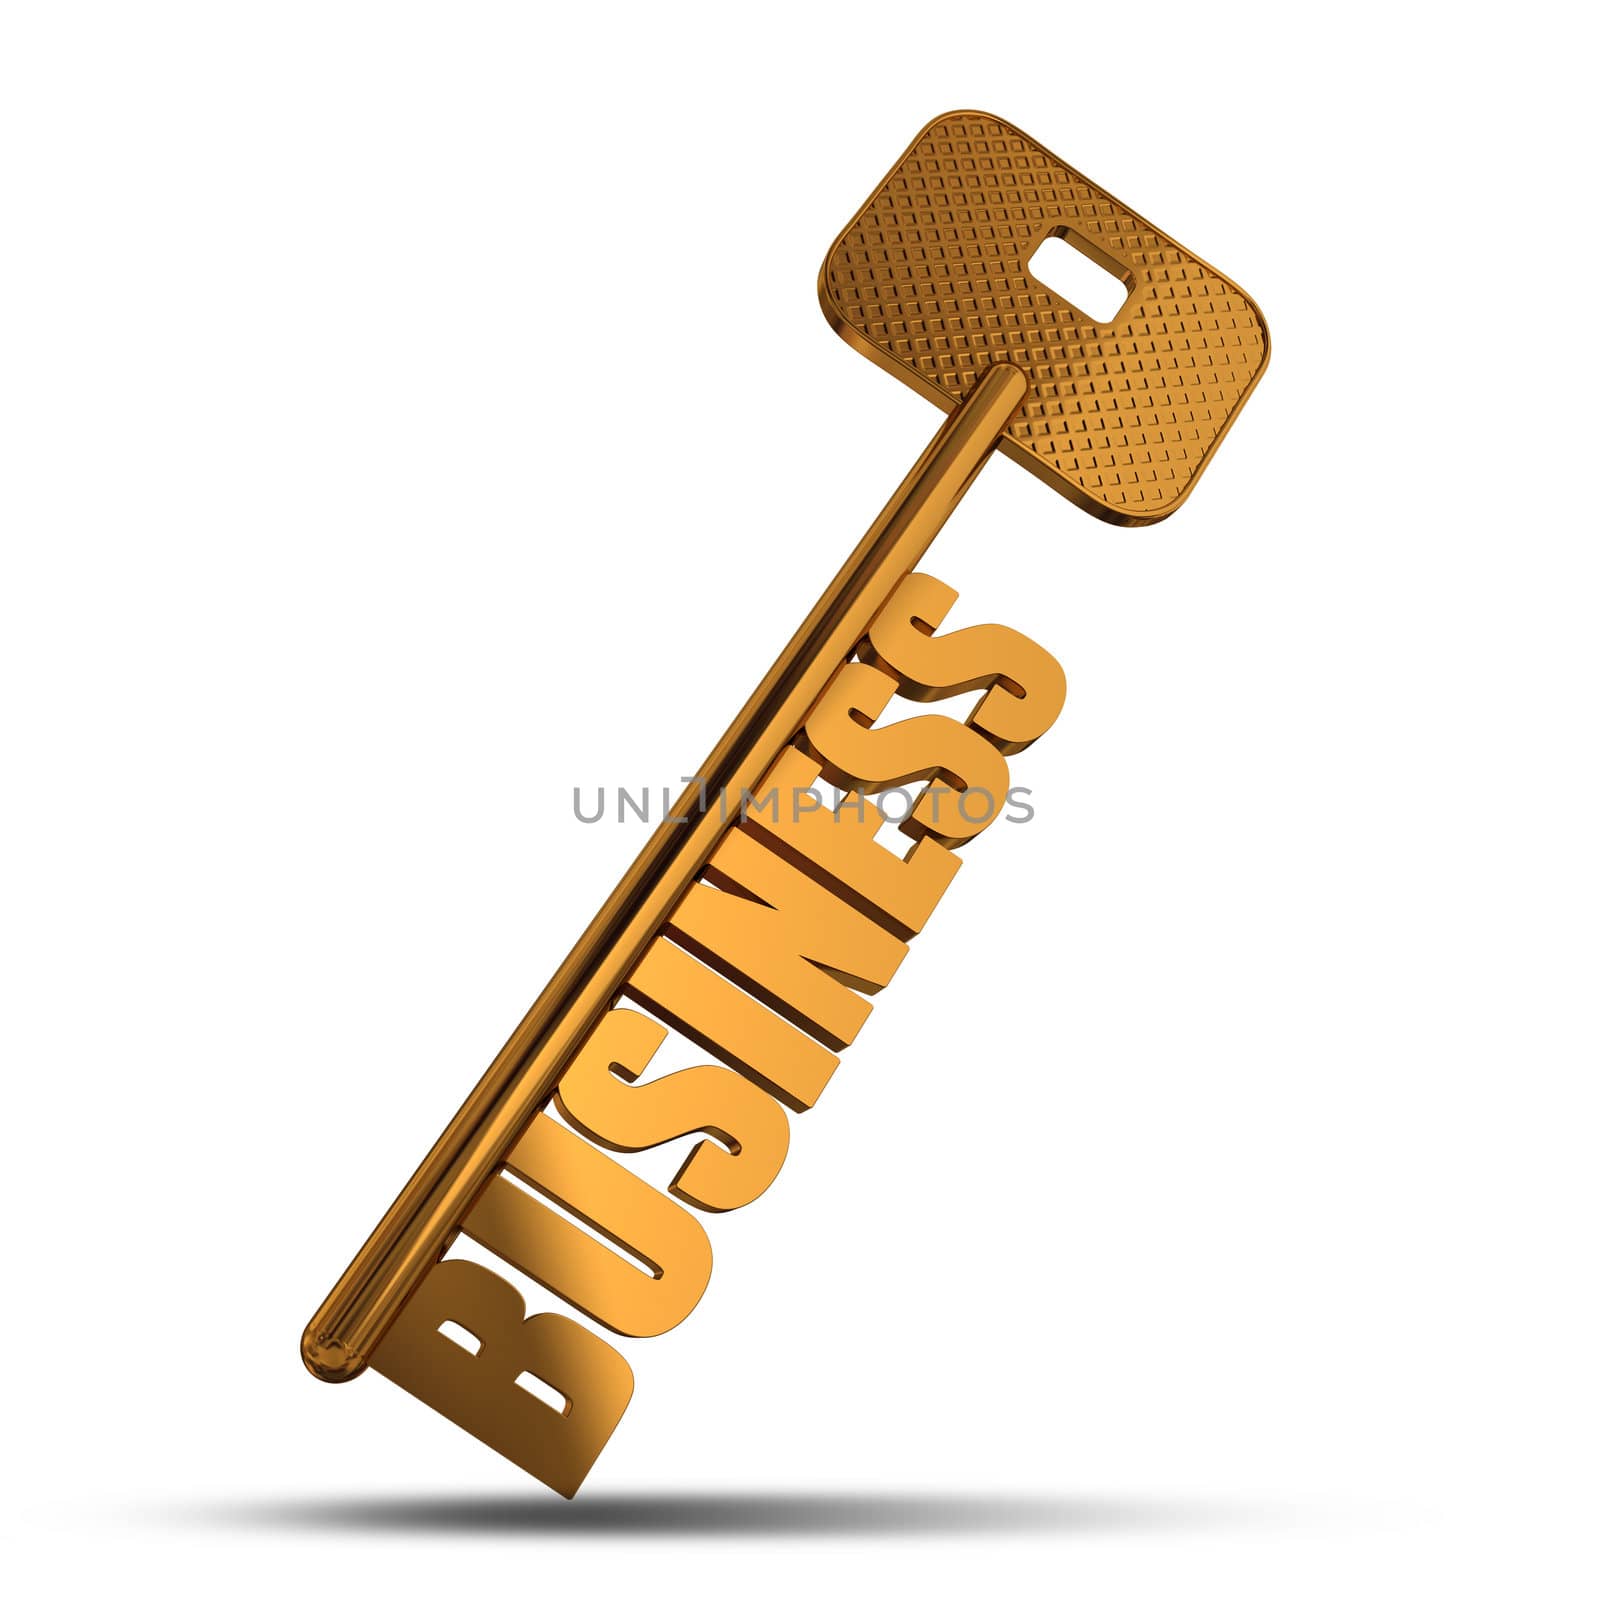 Business gold key isolated on white  background - Gold key with Business text as symbol for success in business - Conceptual image